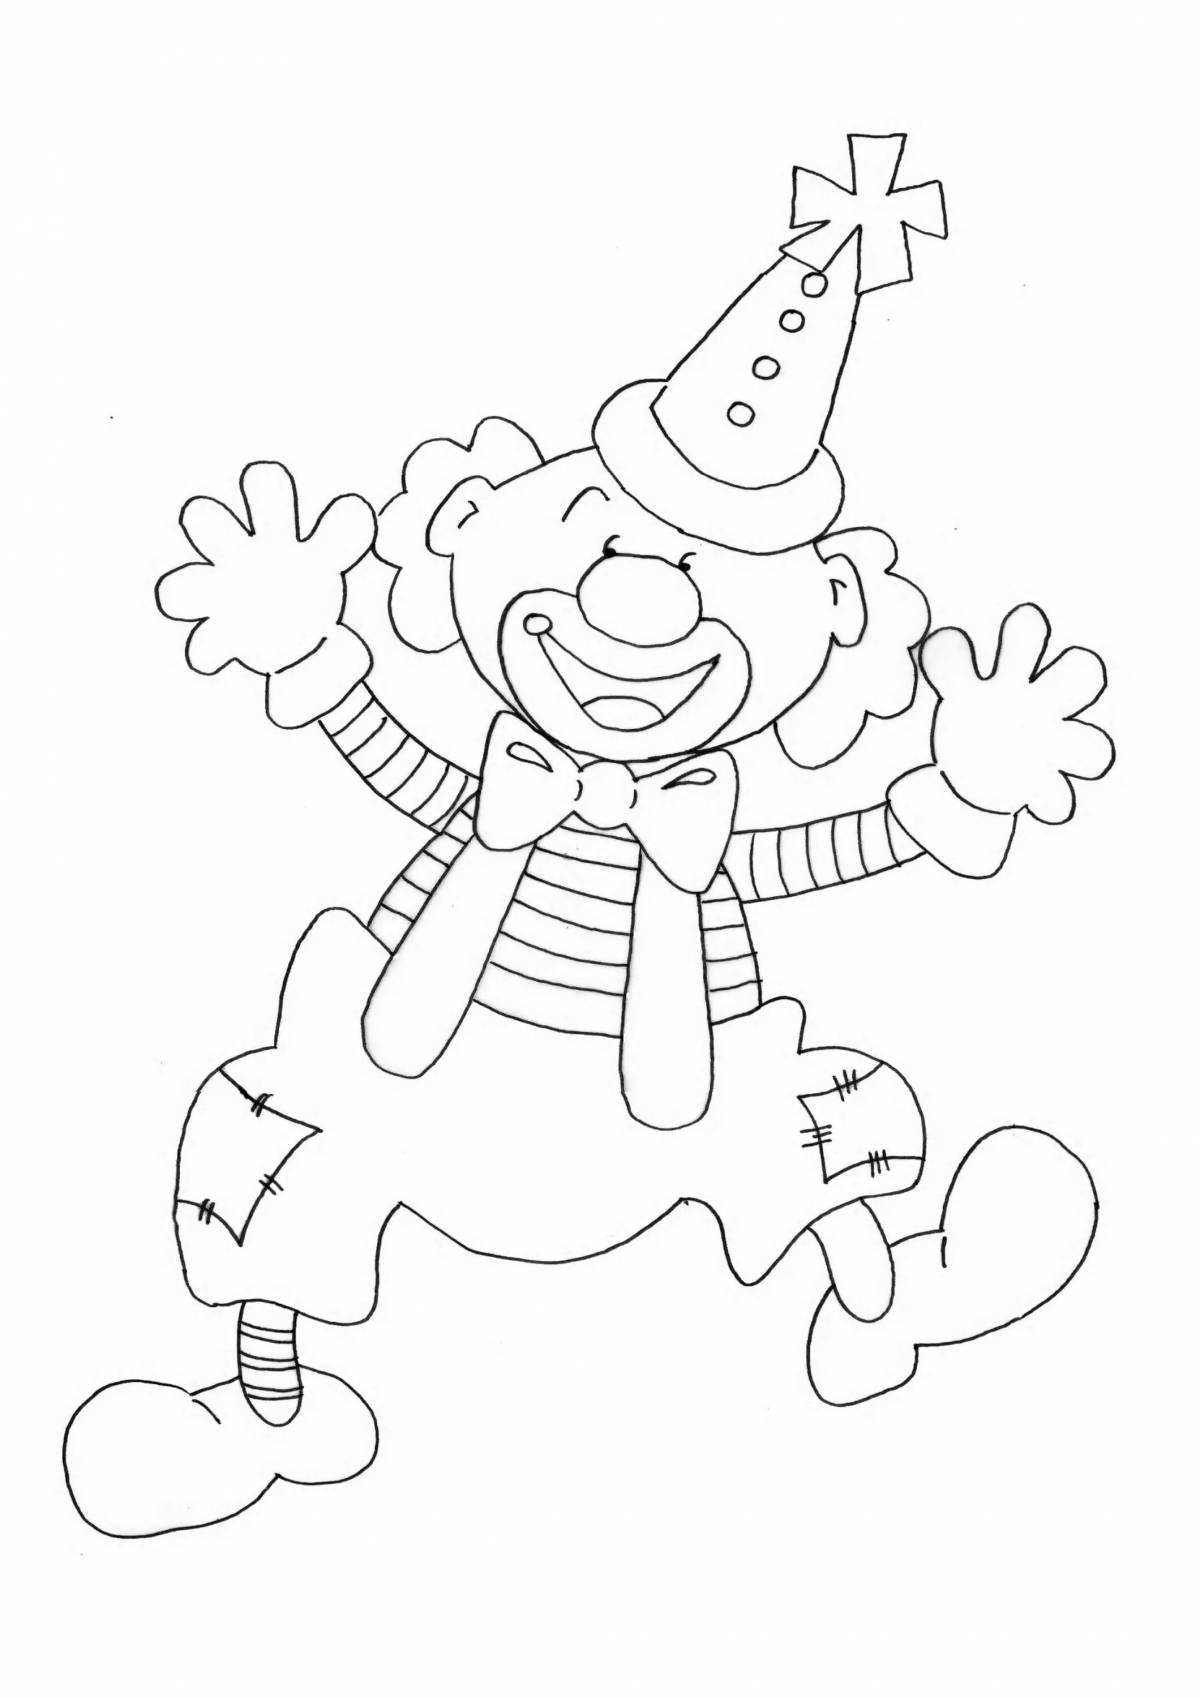 Vibrant clown coloring page for kids